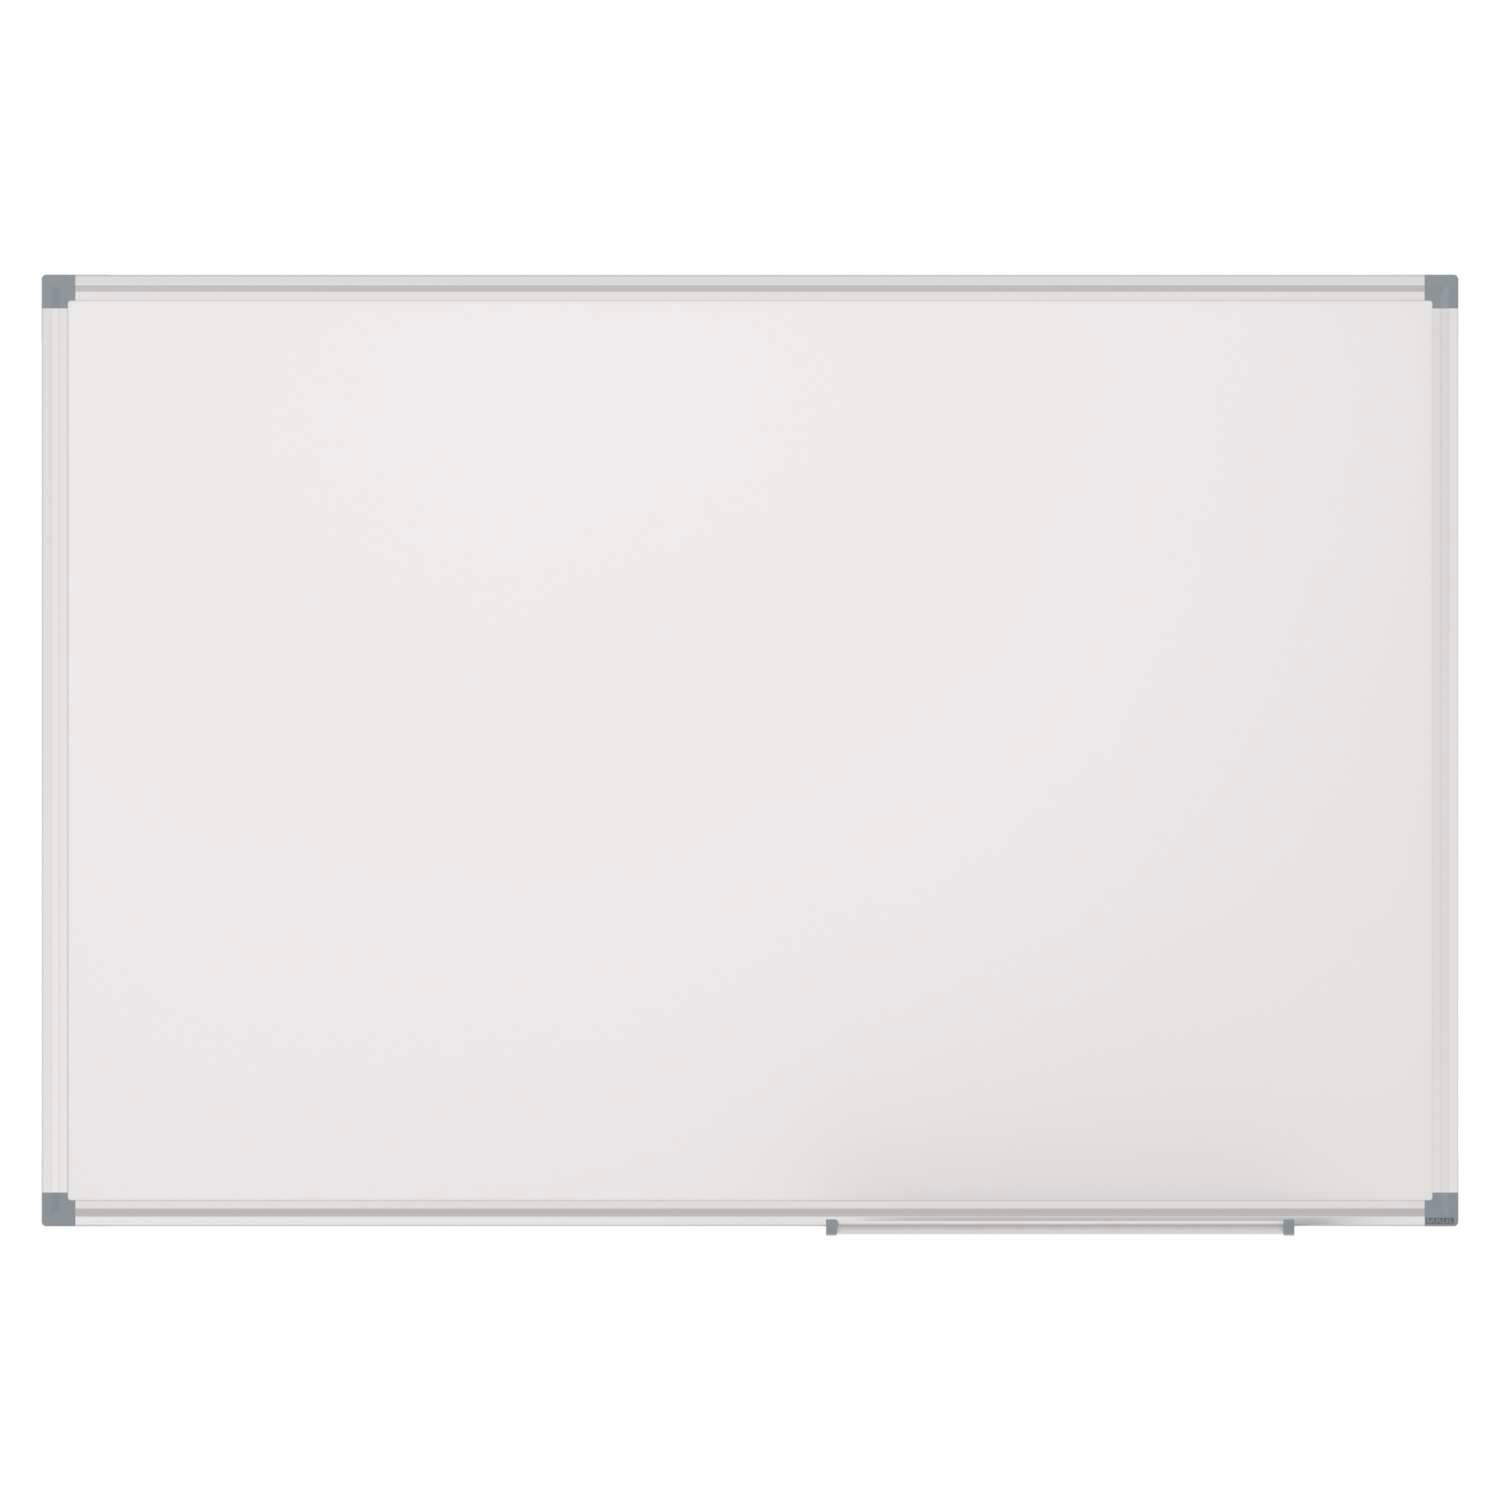 Whiteboard MAULstandard, Emaille, 100x200 cm